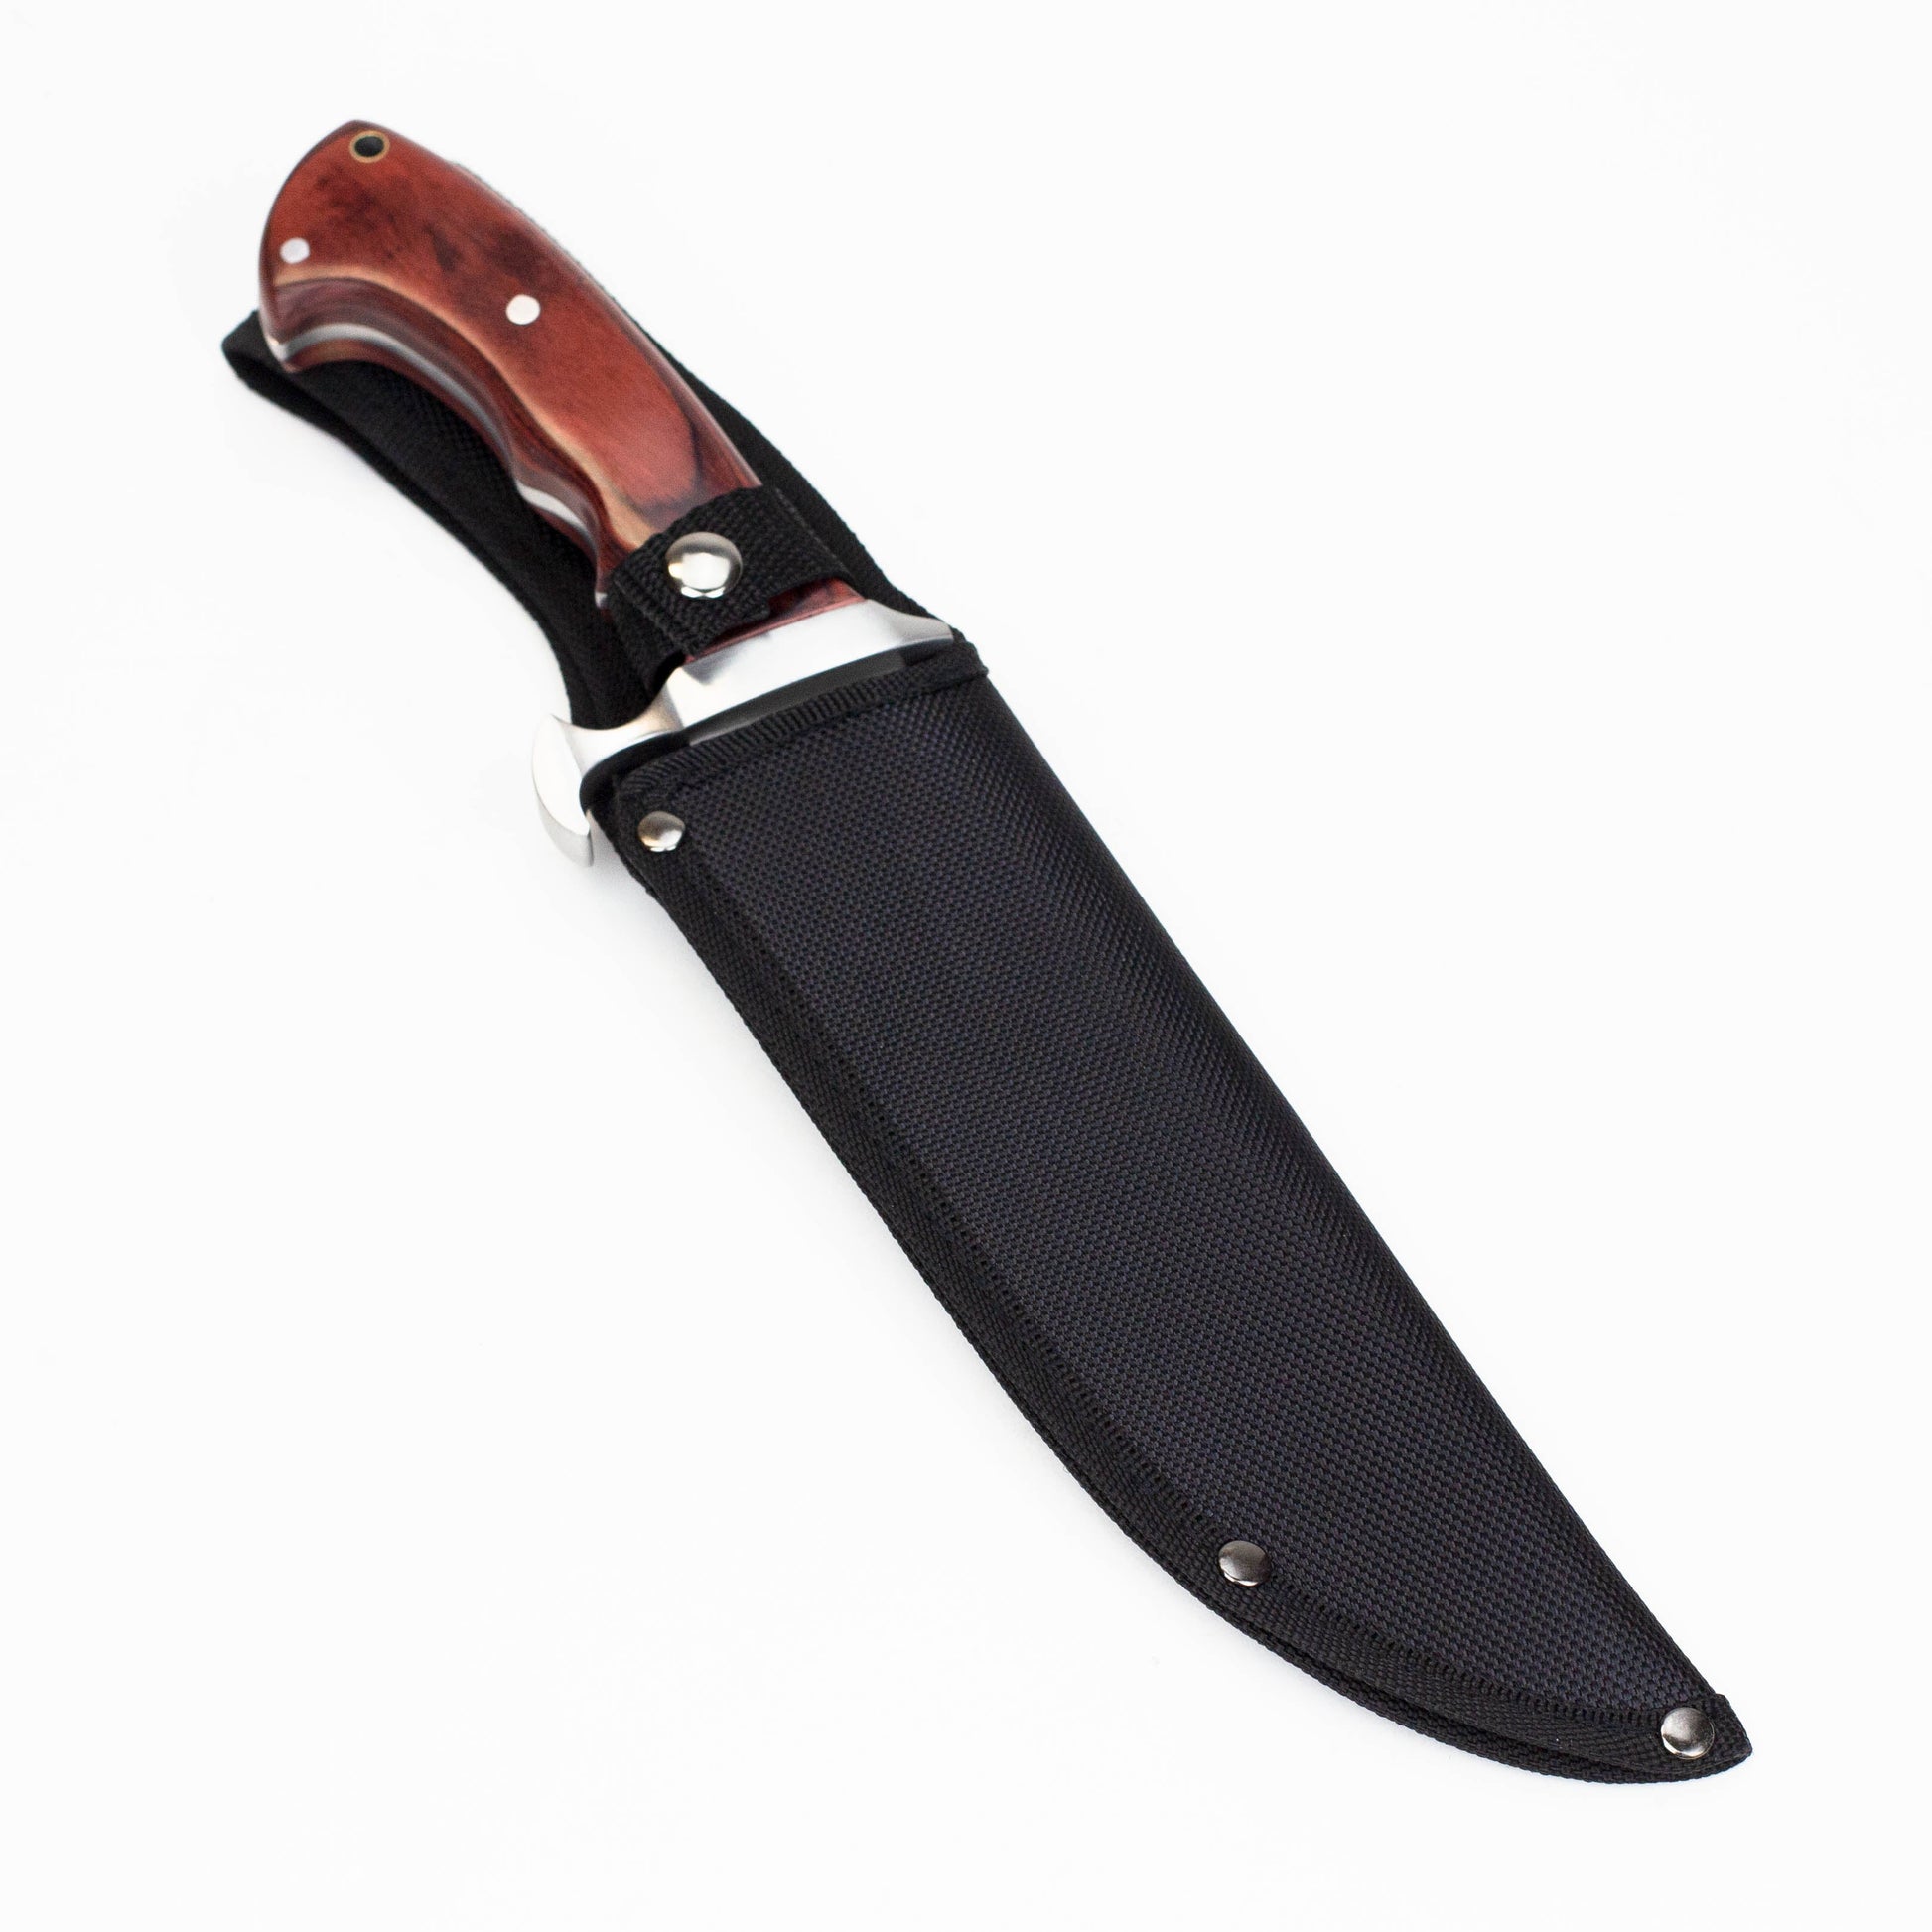 13.5" Full Tang Bowie Hunting Knife [T221666]_4